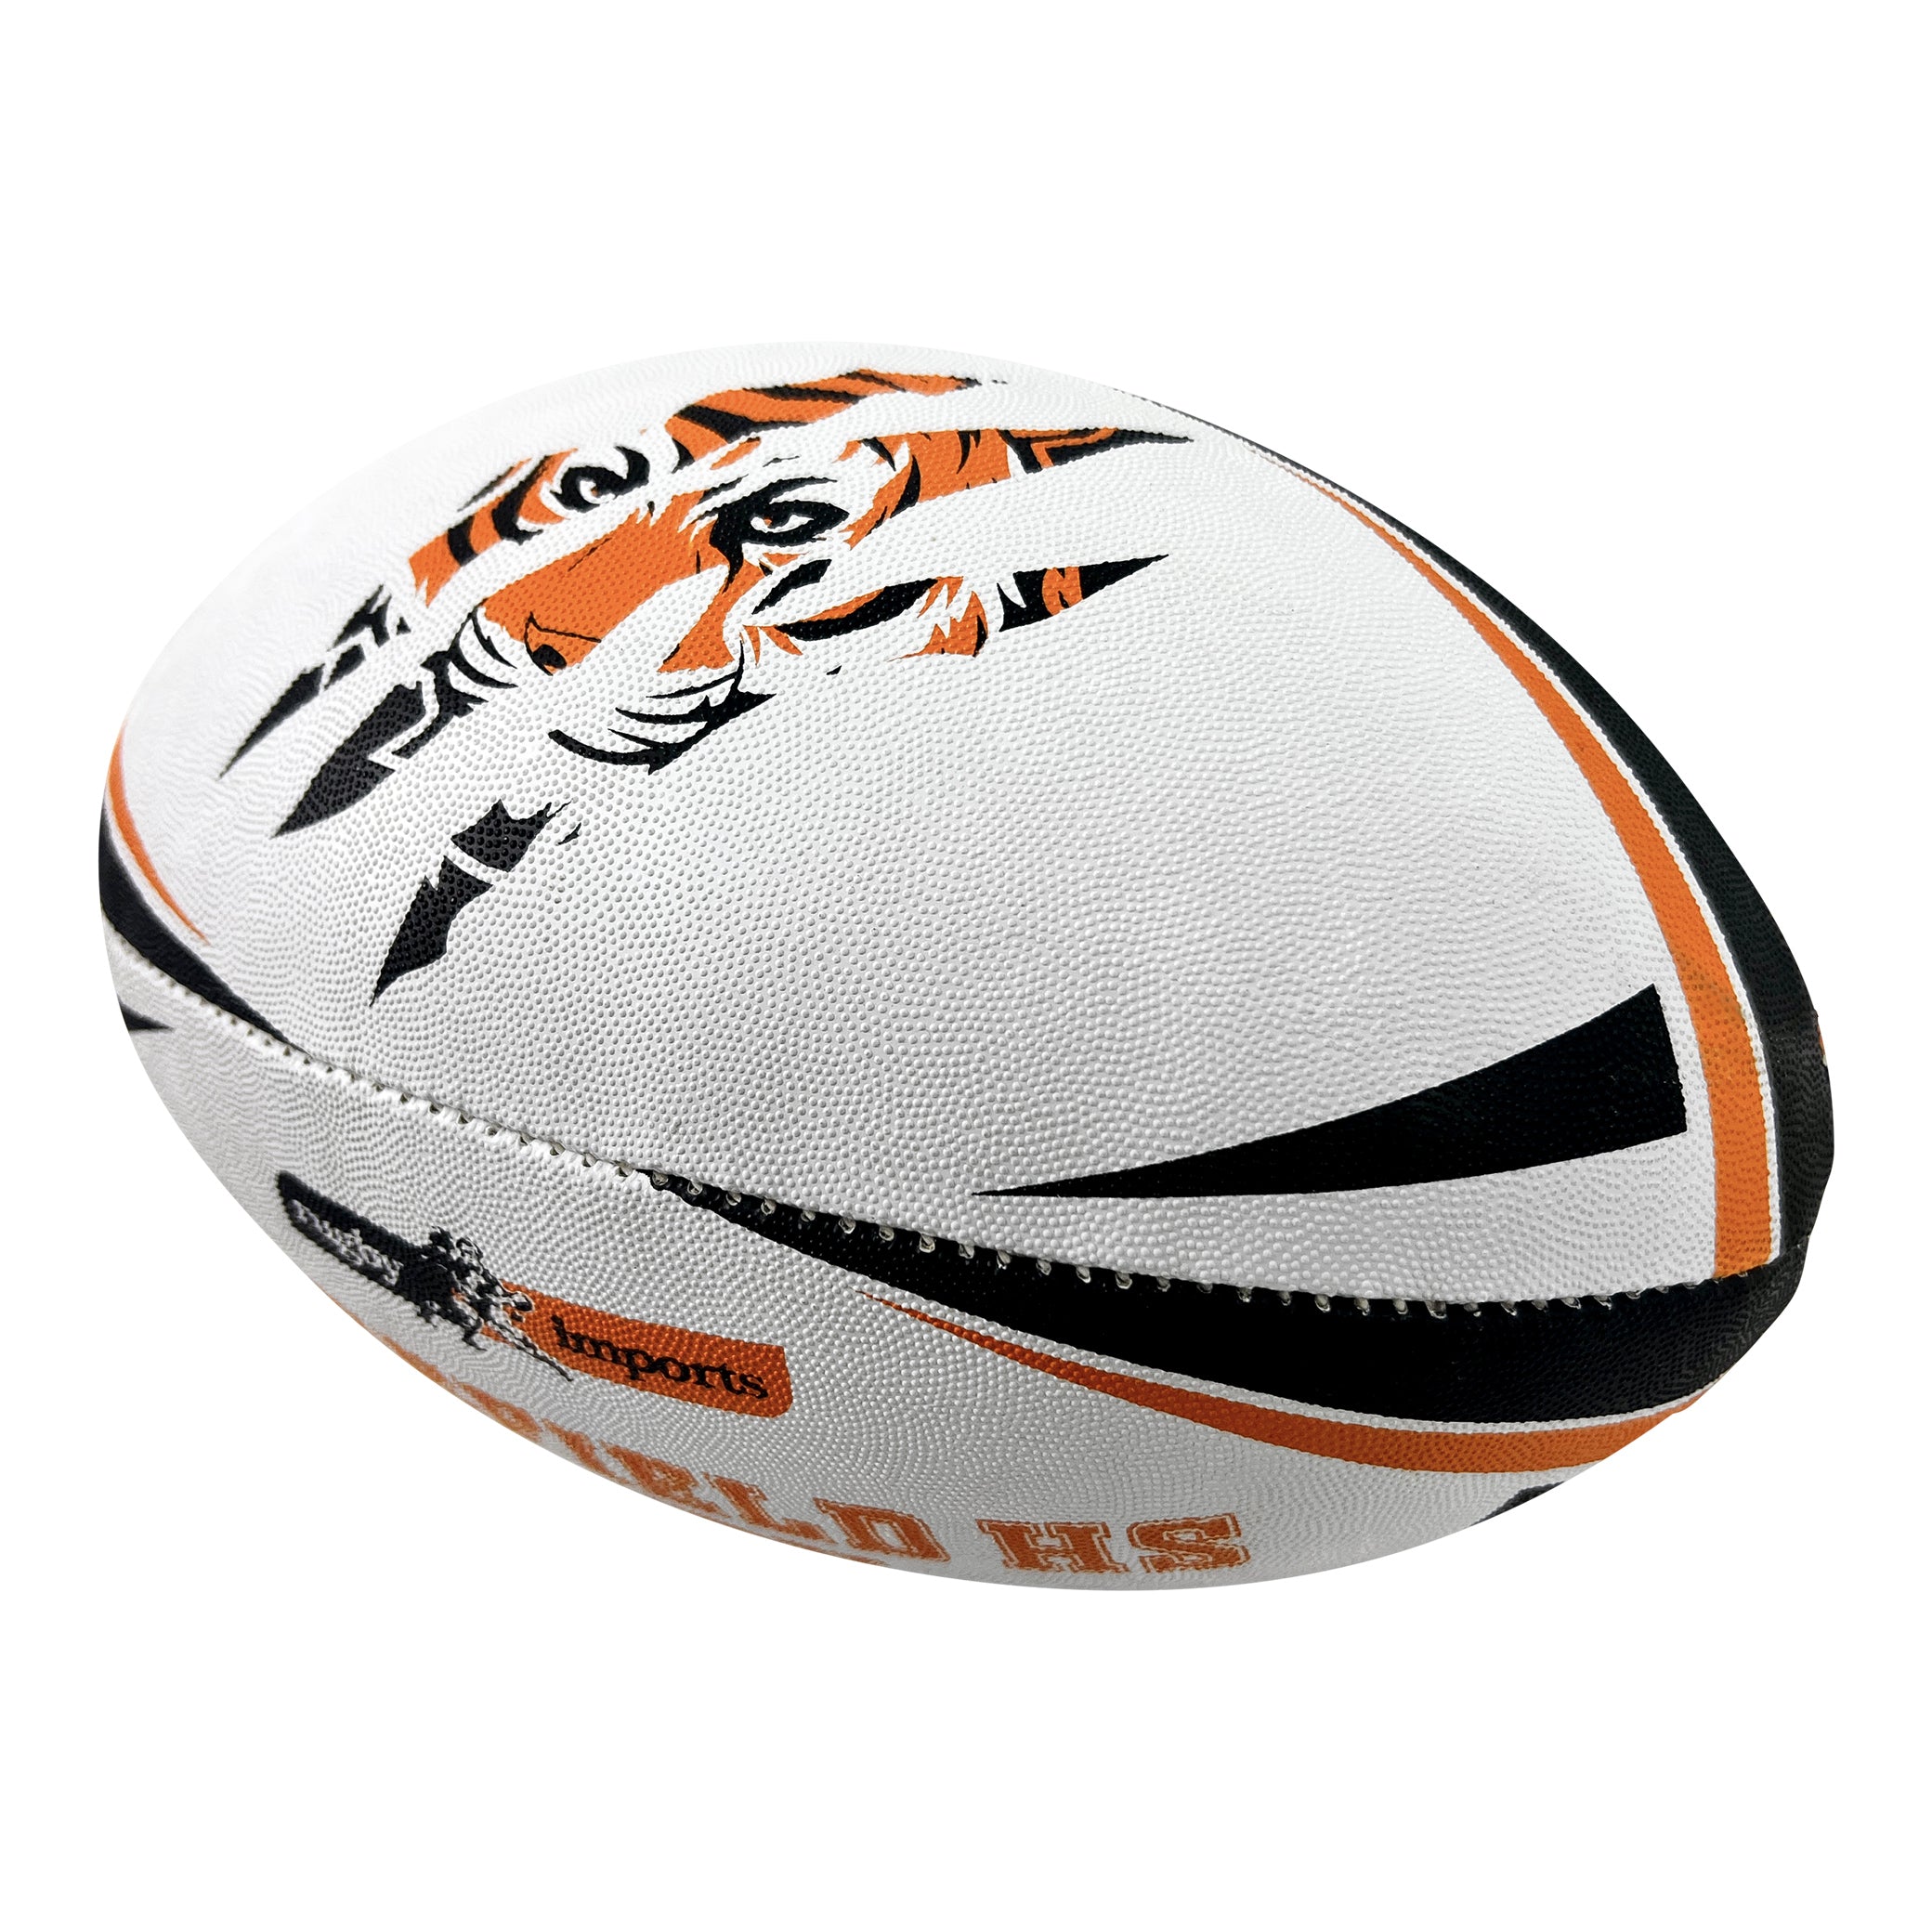 Clermont  Sportcase - Coques personnalisables, football, rugby, basket !  15.99€ seulement !